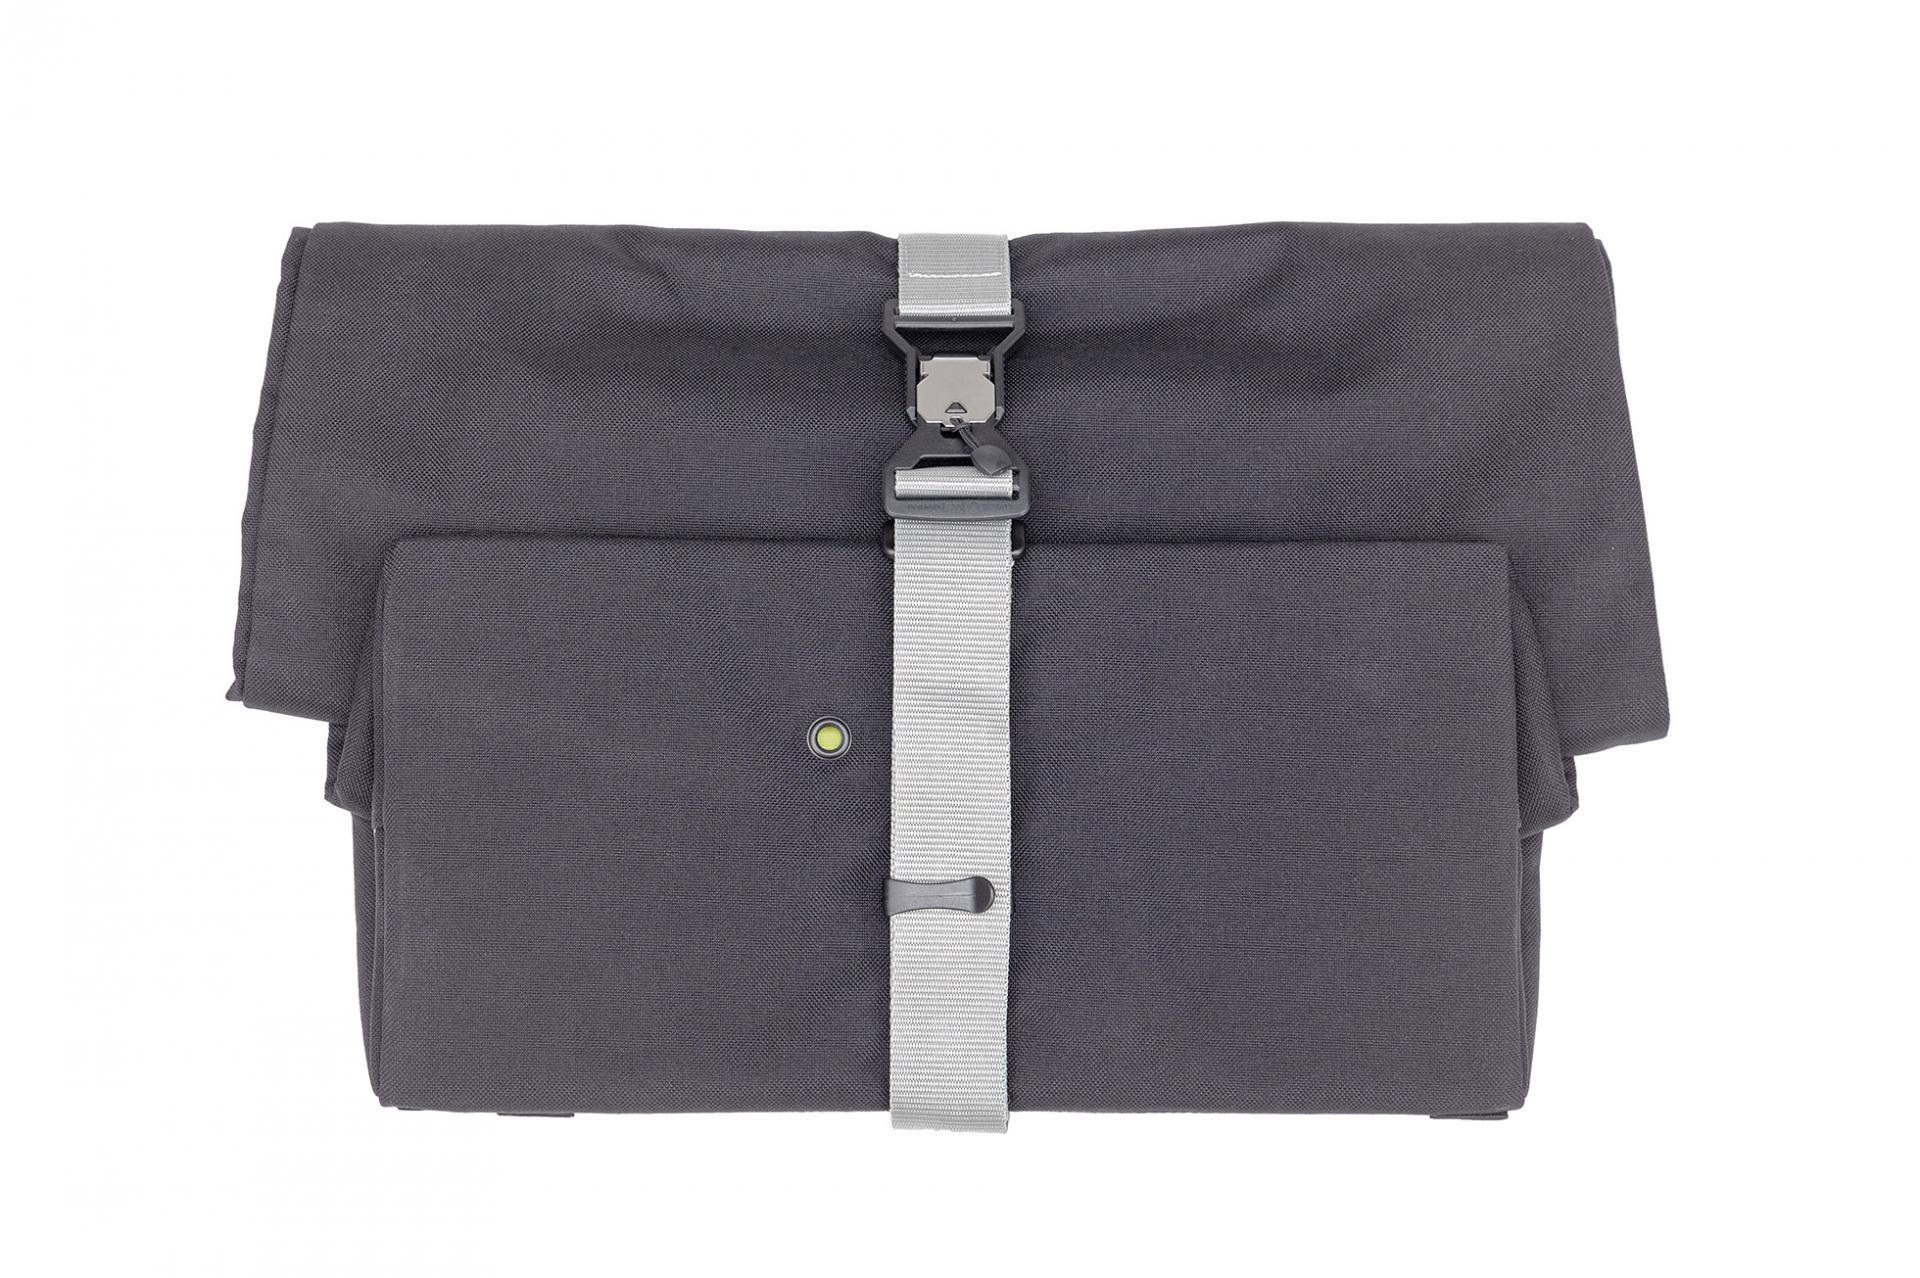 Tern Cargo Hold Panniers 37"